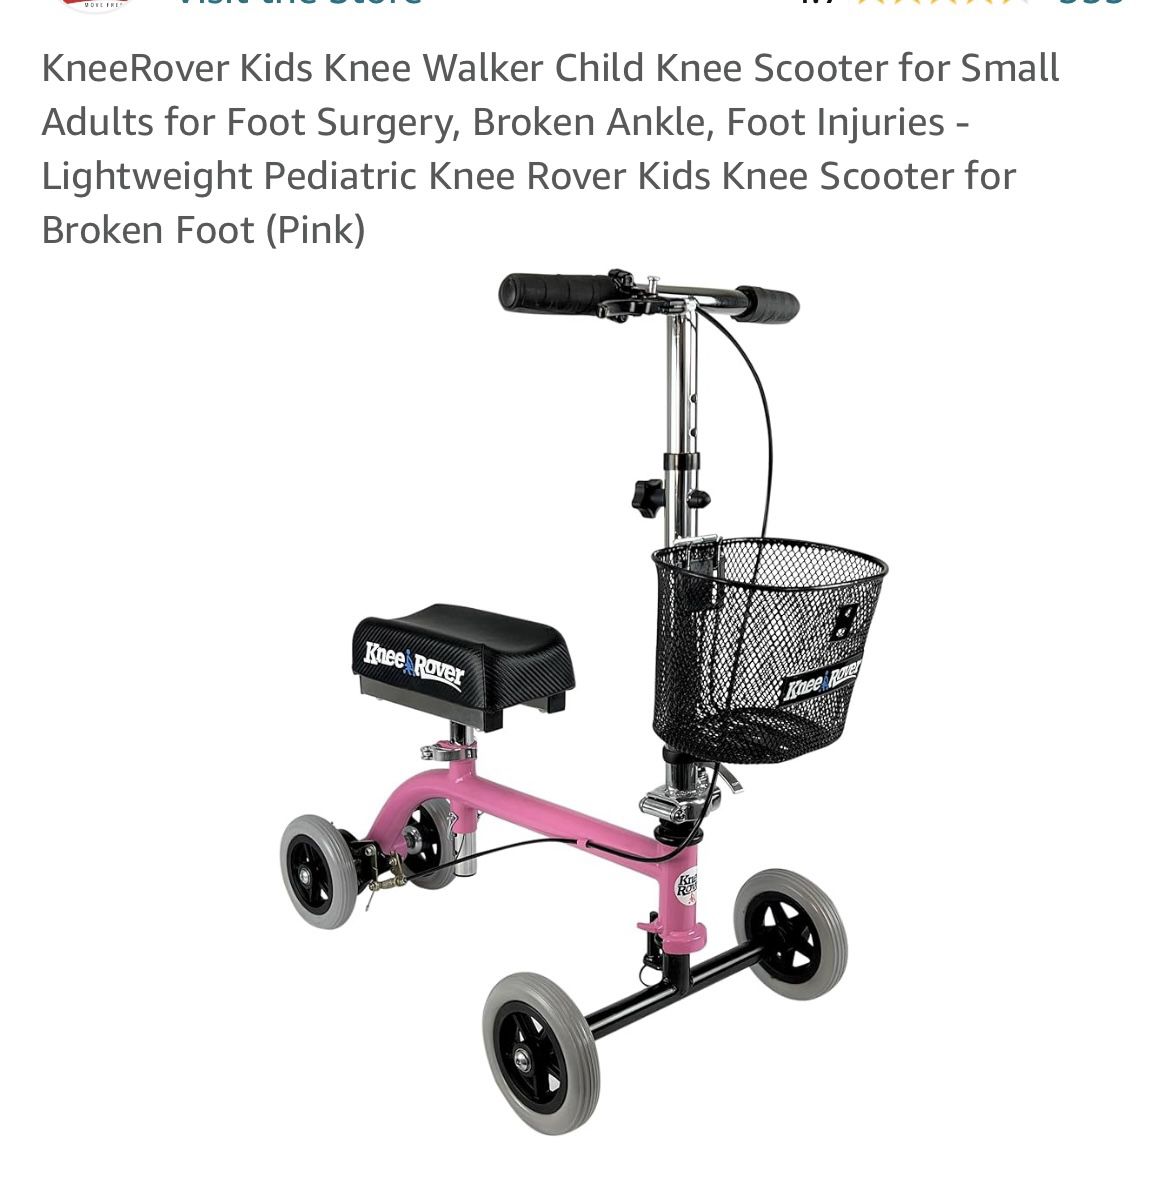 KneeRover Kids Knee Walker Child Knee Scooter for Small Adults Pink New in Box 